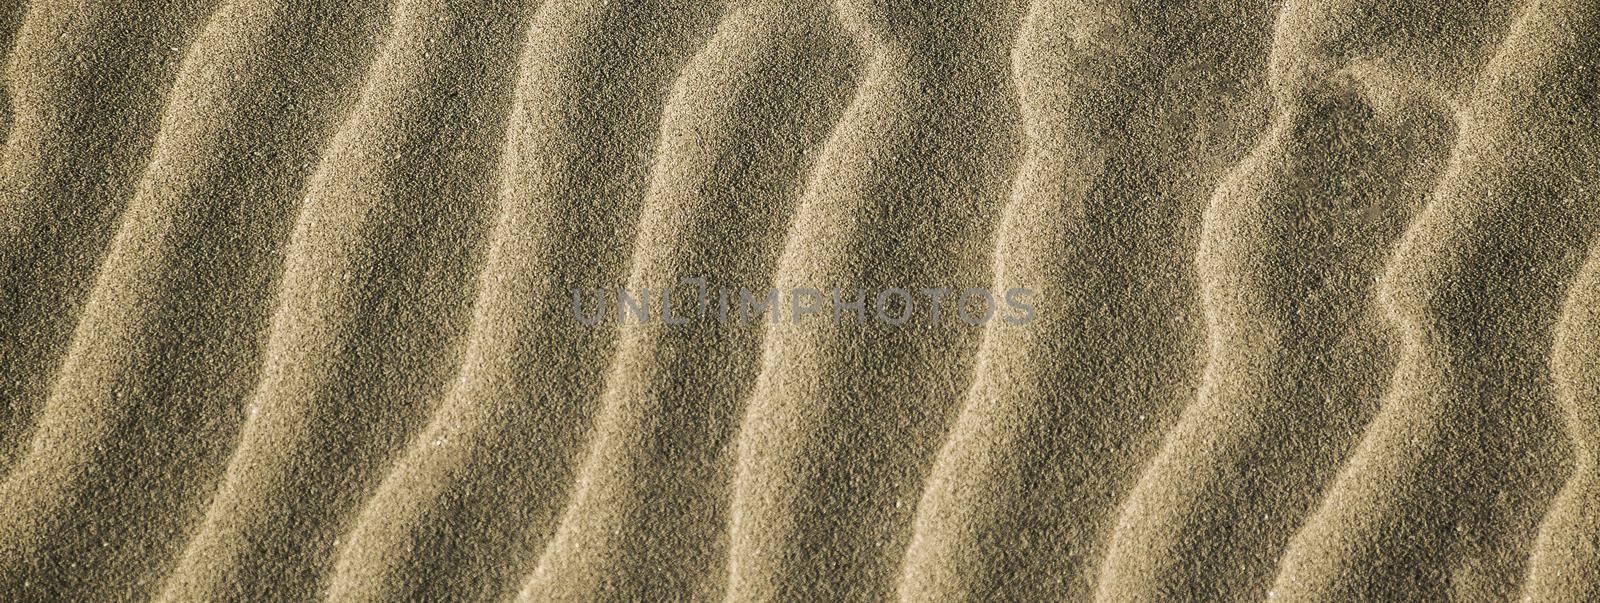 Sand texture detail, banner image with copy space